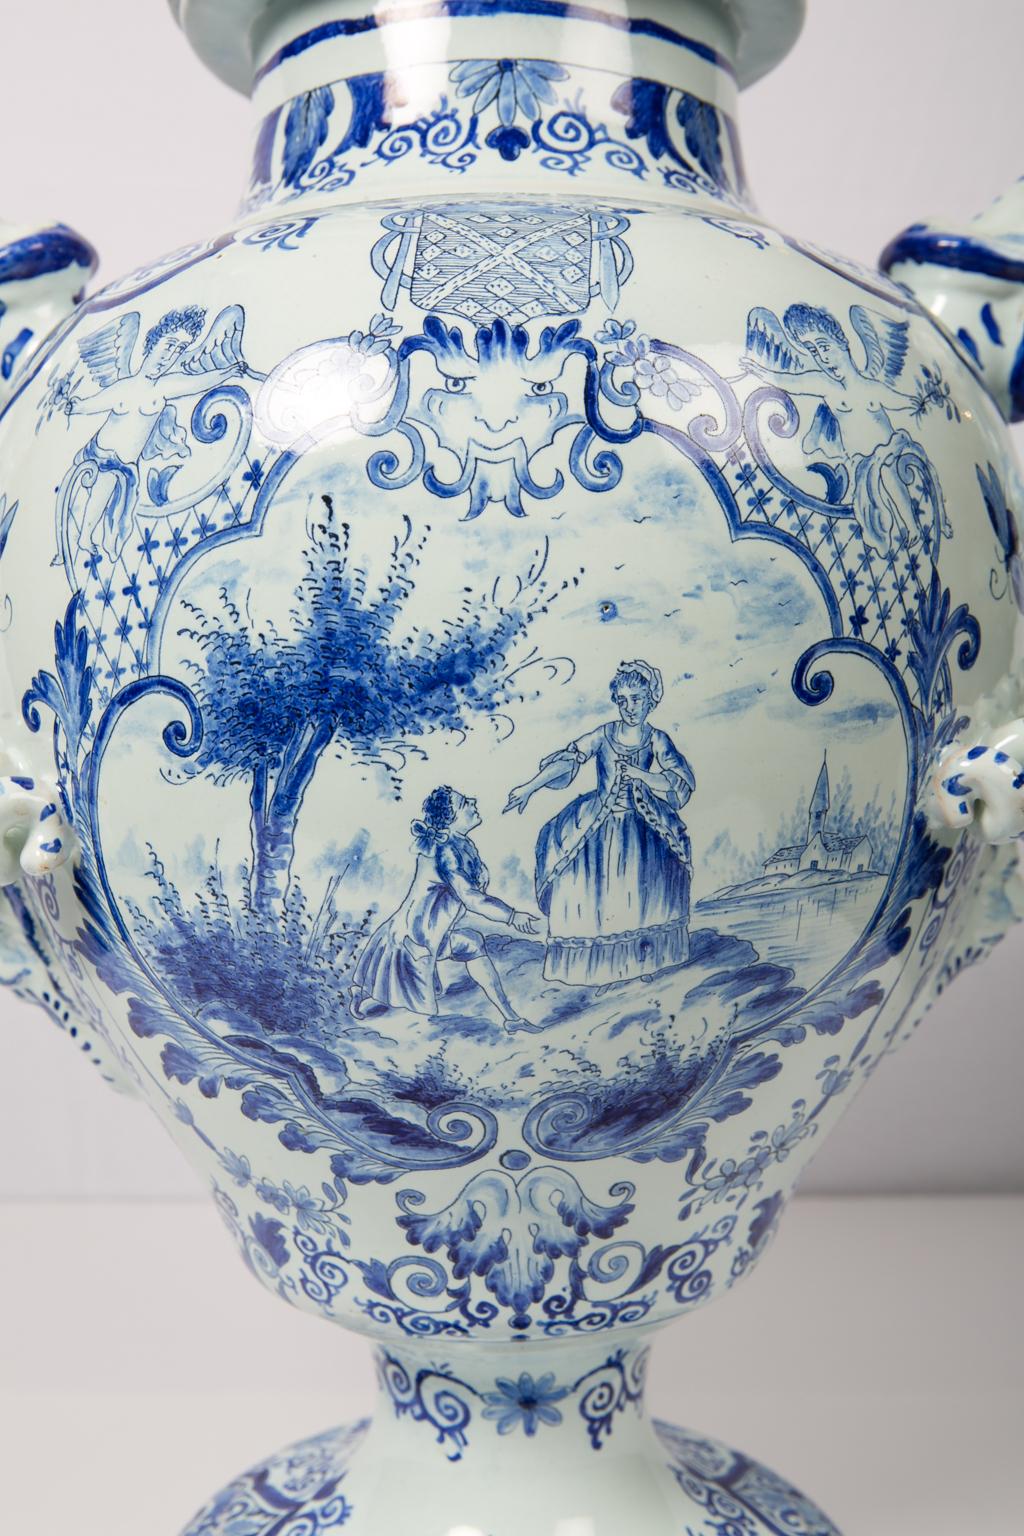 A large Dutch delft blue and white covered urn decorated in several shades of blue featuring an armorial shield supported by angels. The striking handles are in the form of coiled snakes. The base, shoulder, and cover of the vase are decorated with